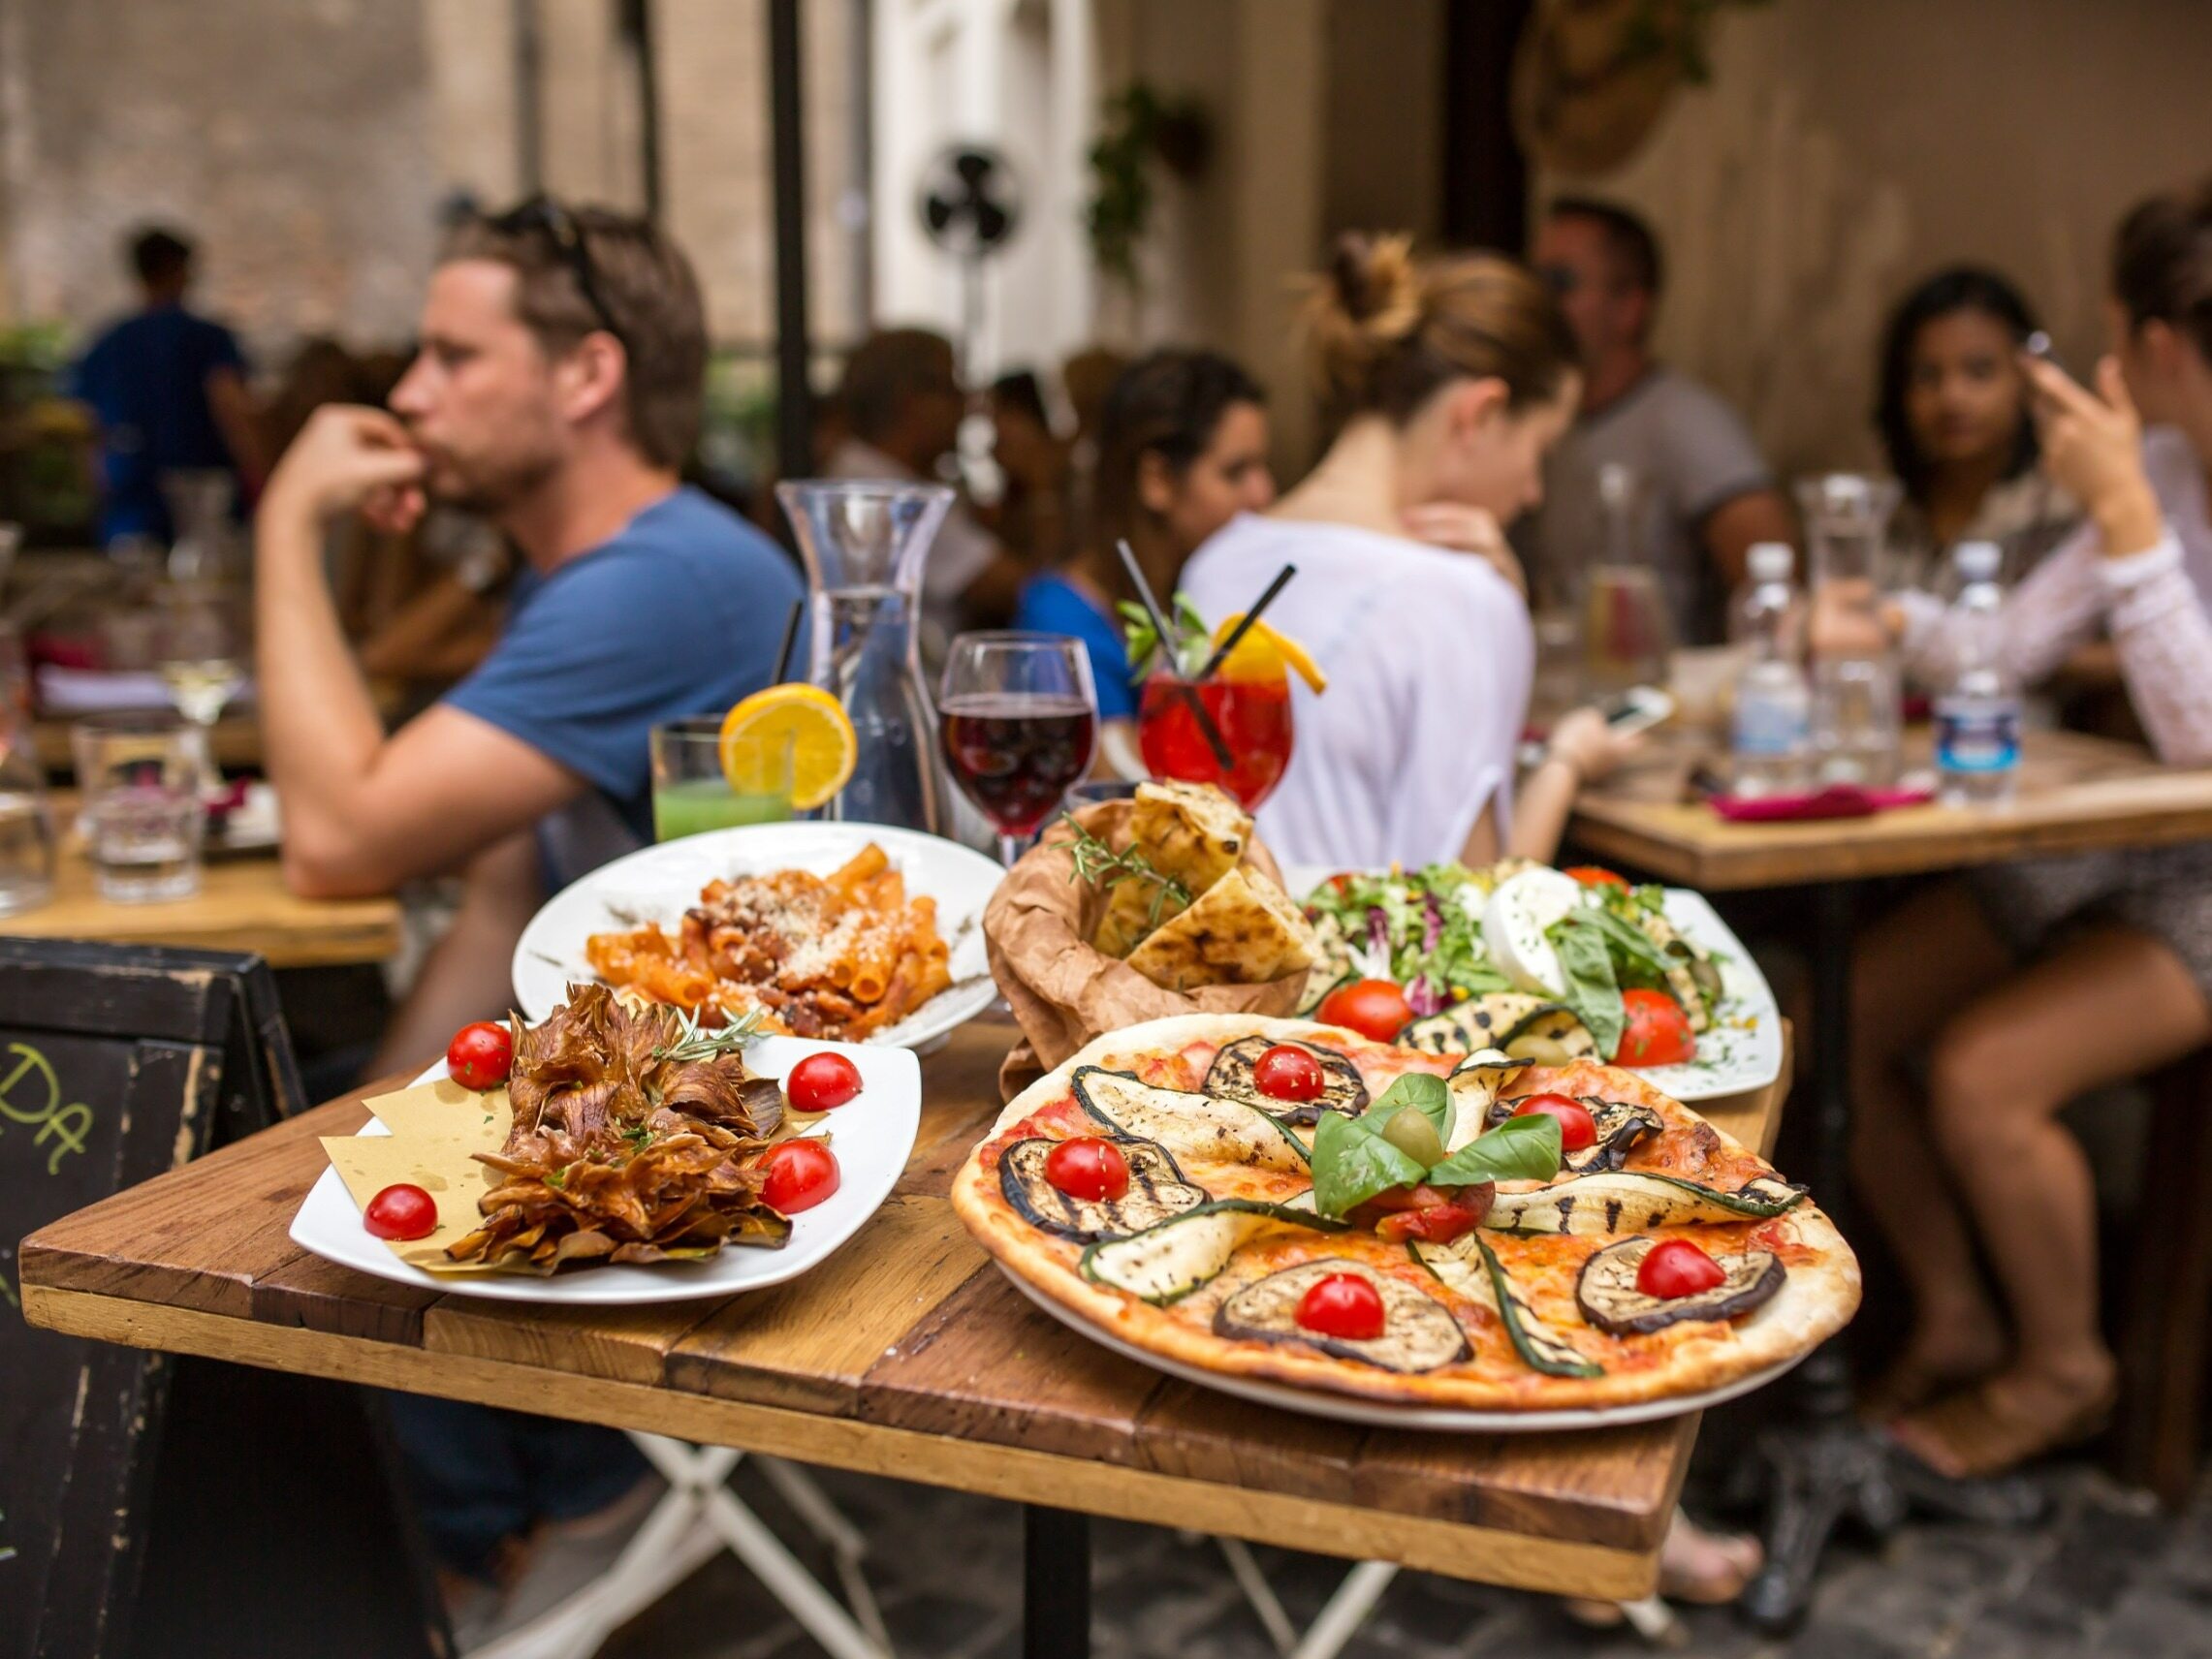 Tourists being charged in Italian restaurants?  They usually don't expect it